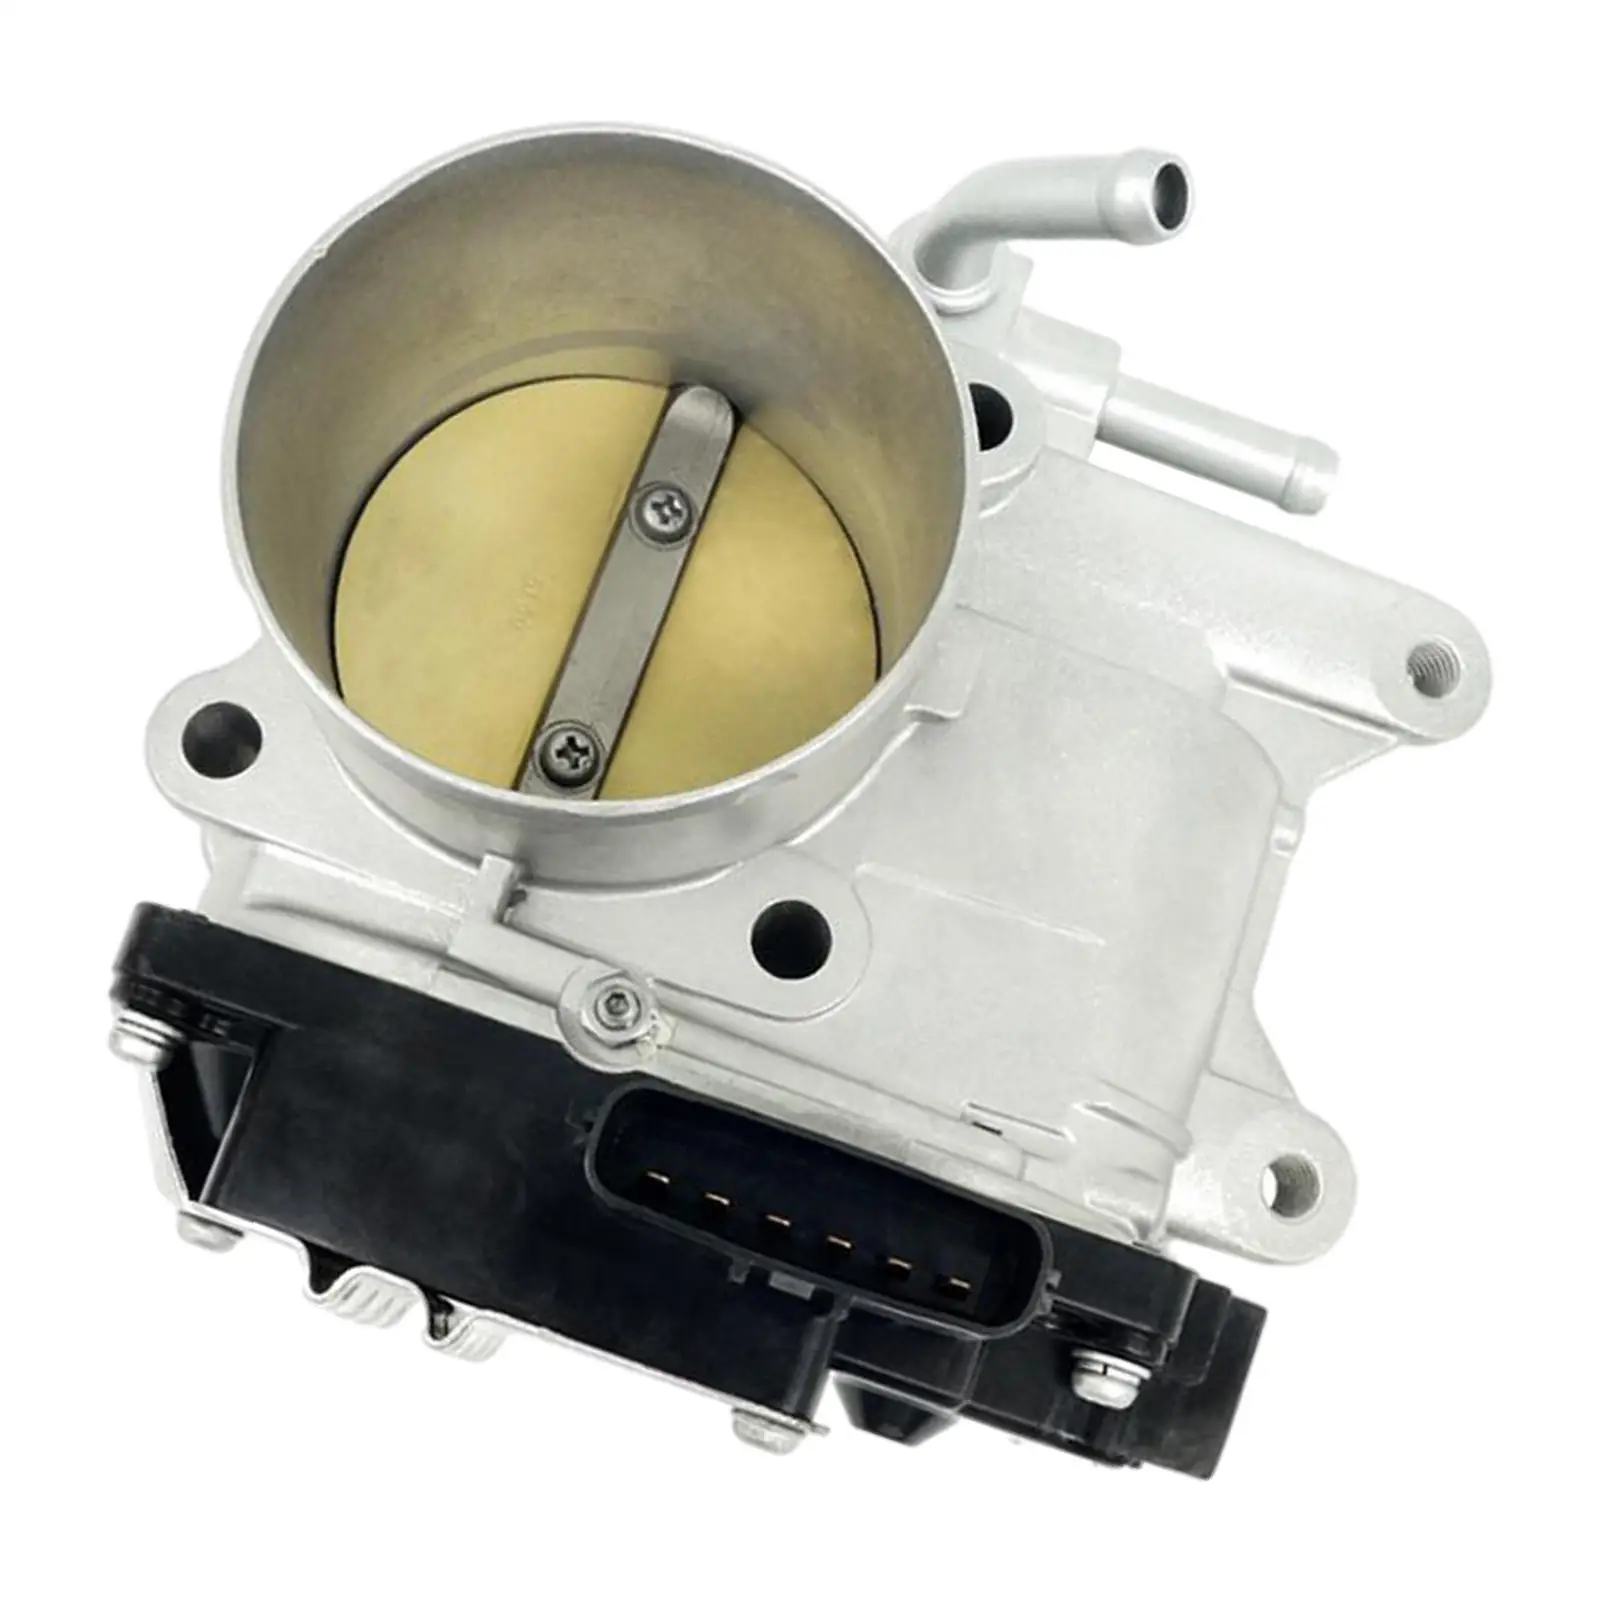 Engine Throttle Body Assy for Mitsubishi Outlander 3.0L Accessories Parts Replacement Easy to Install